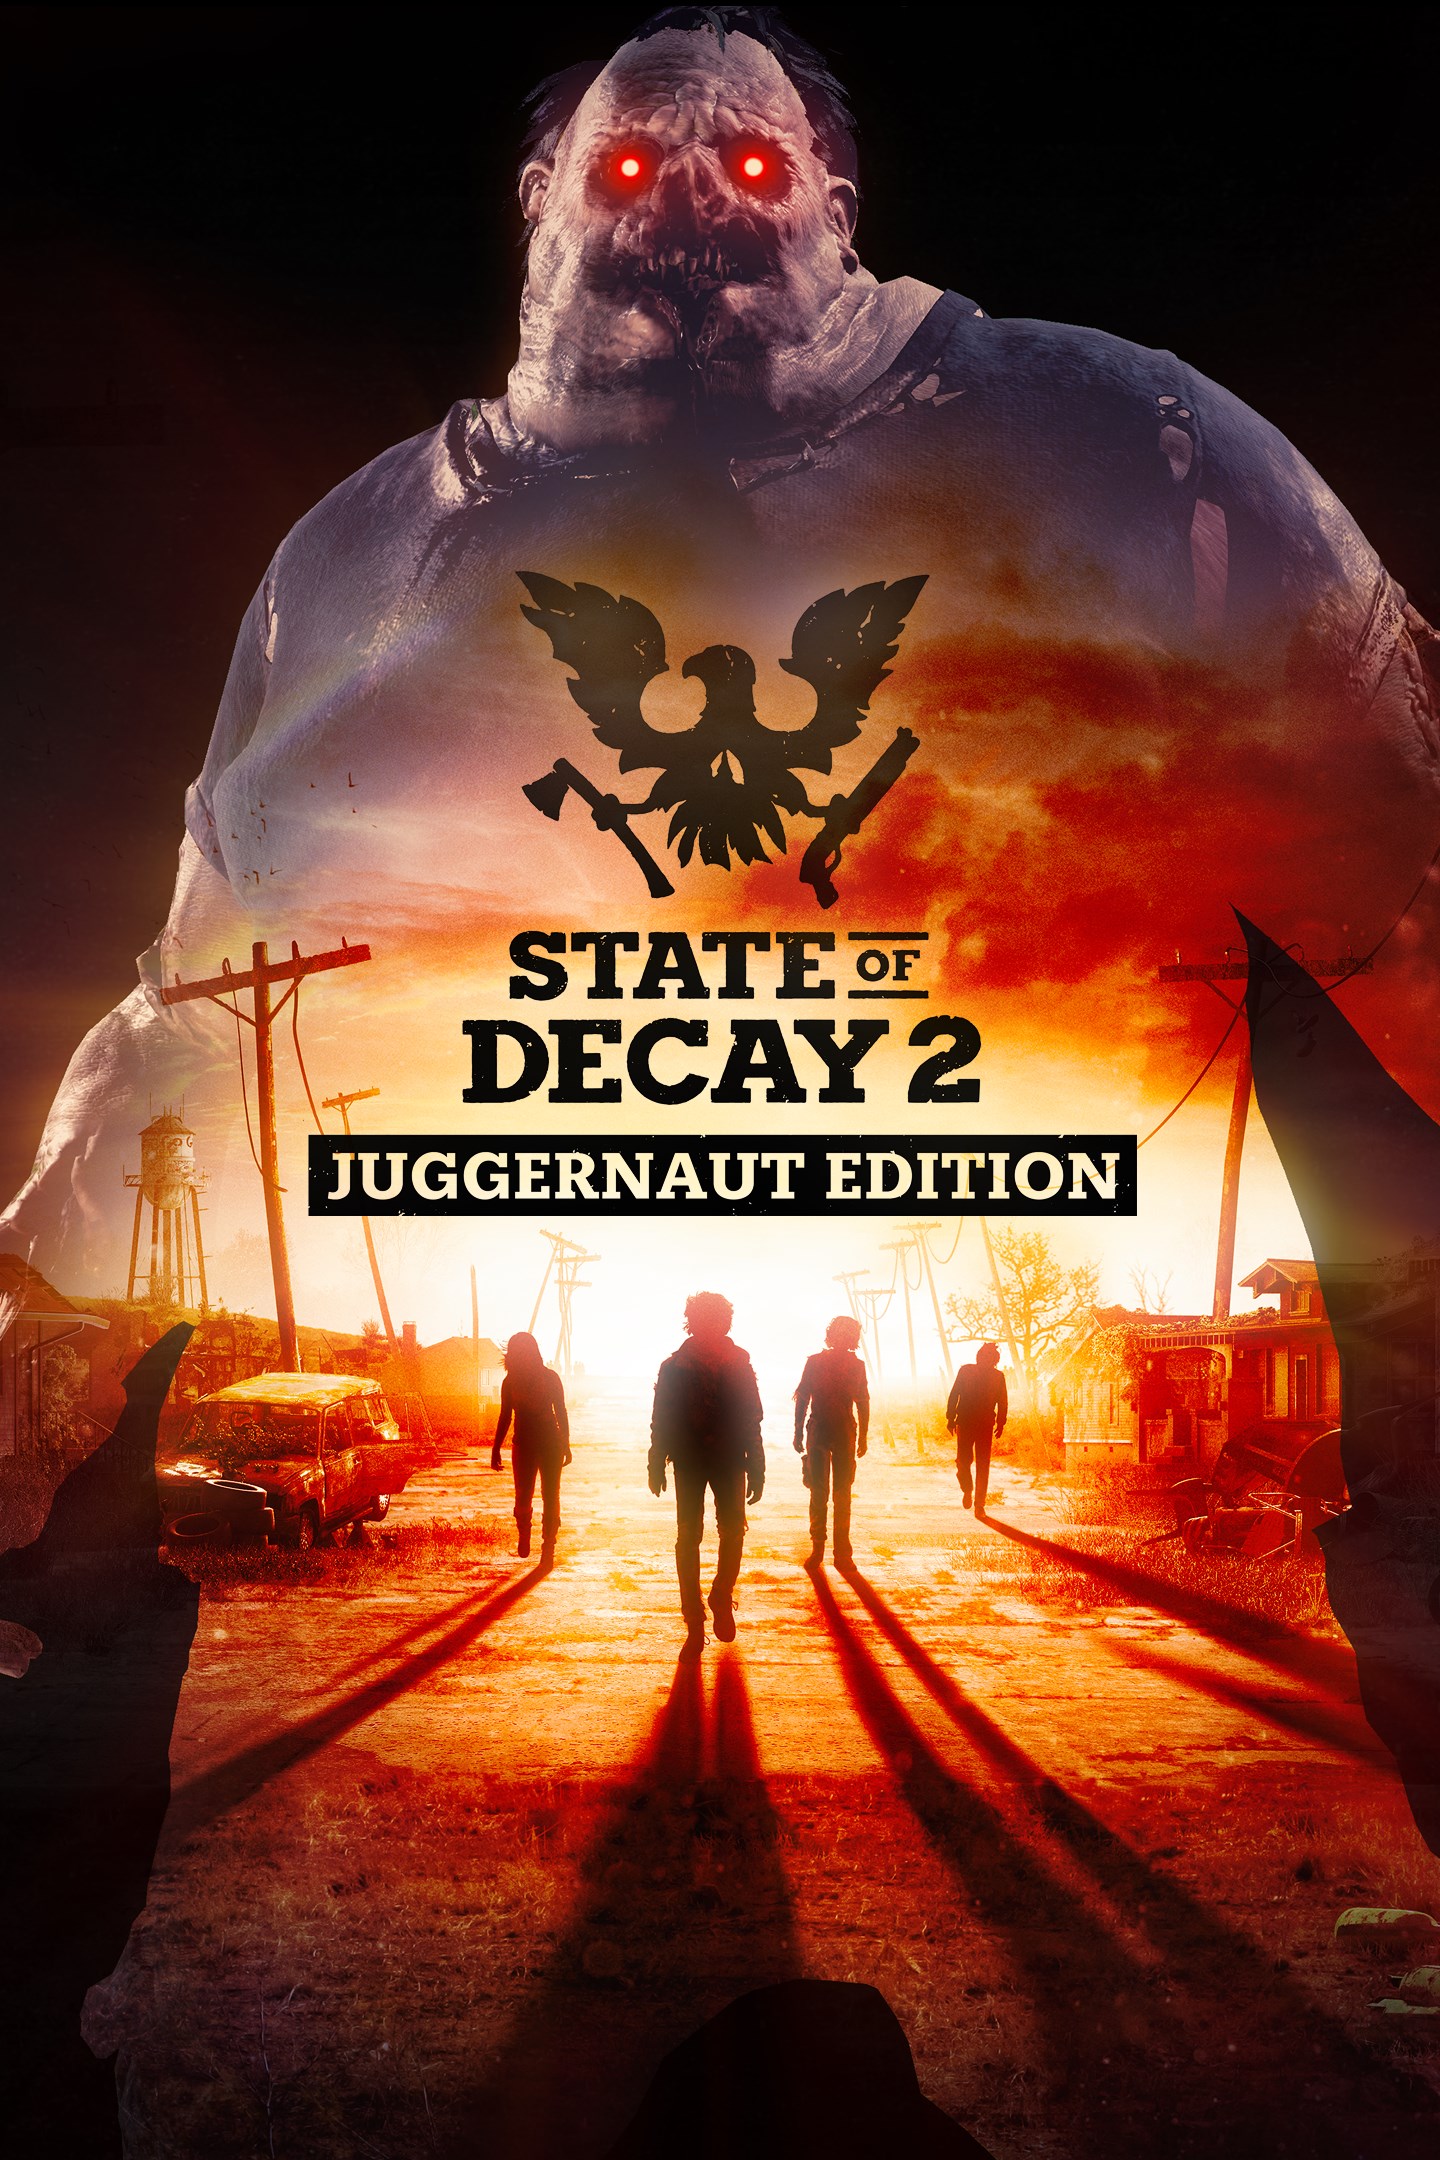 state of decay 2 code